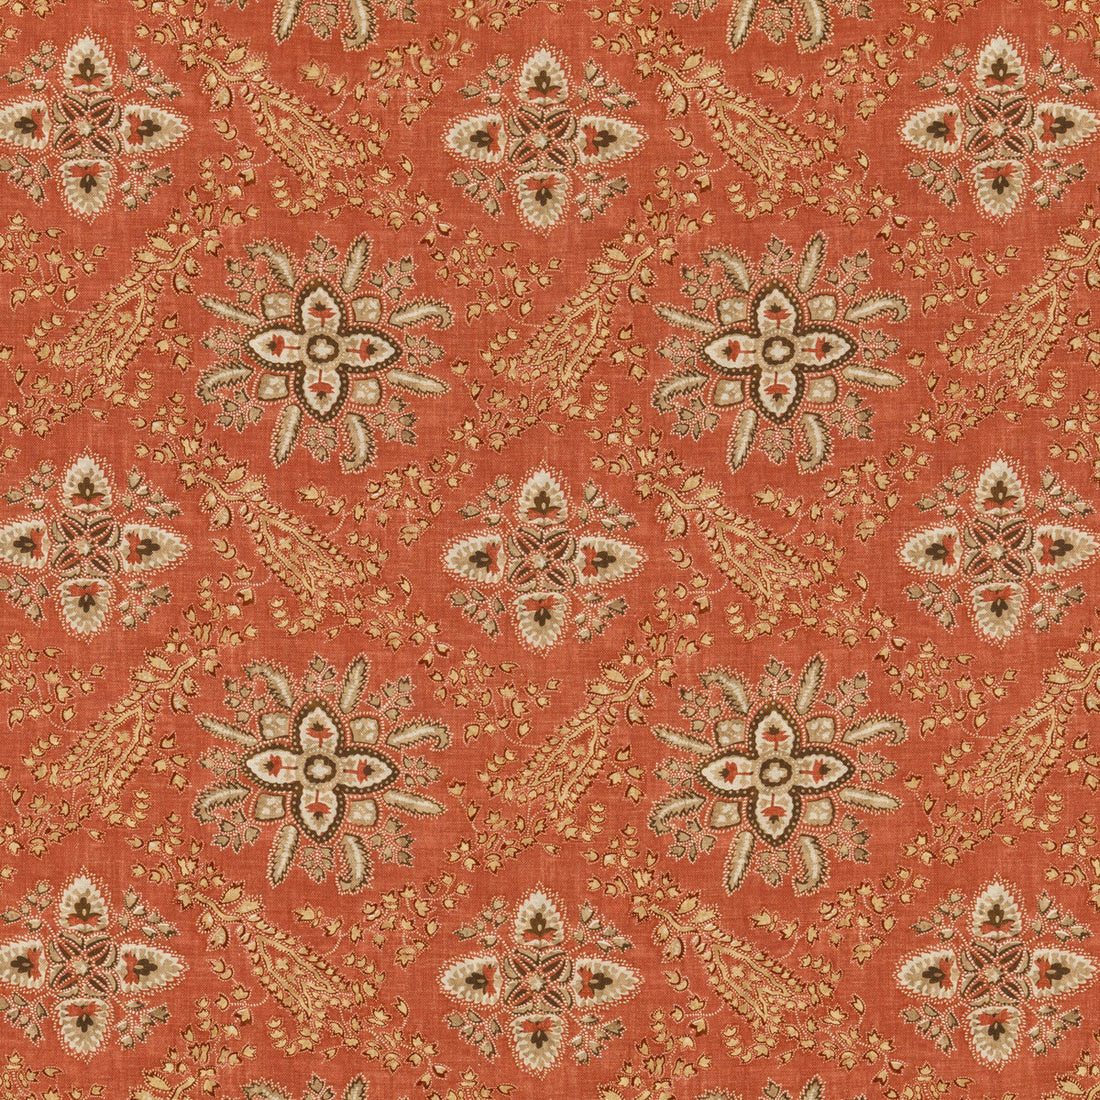 Cashmira fabric in red color - pattern BP10836.2.0 - by G P &amp; J Baker in the Coromandel collection